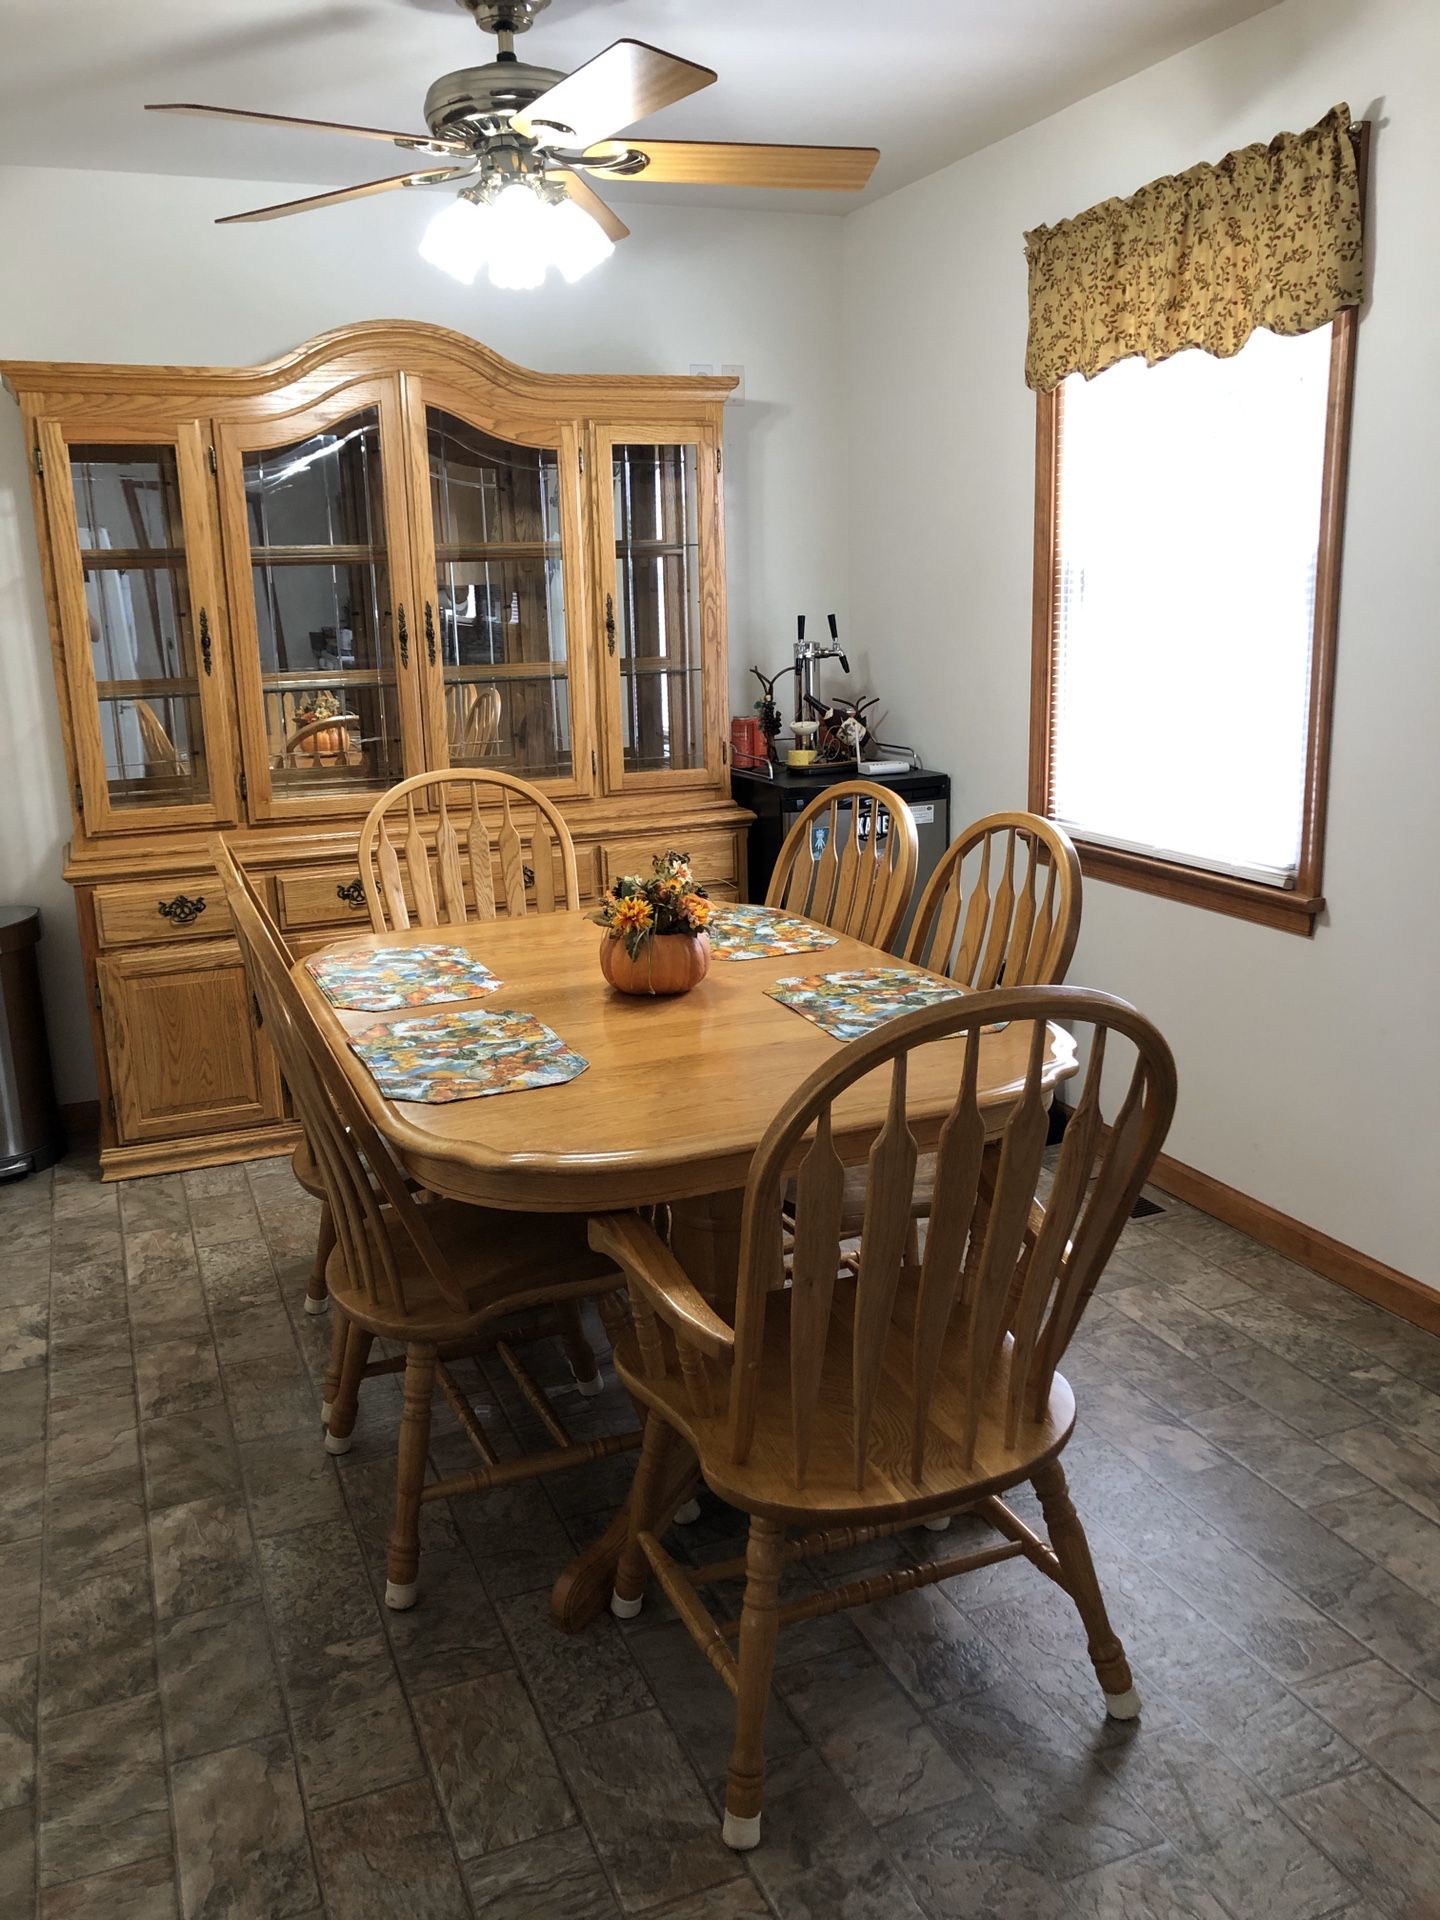 Dining room table with chairs and china cabinet